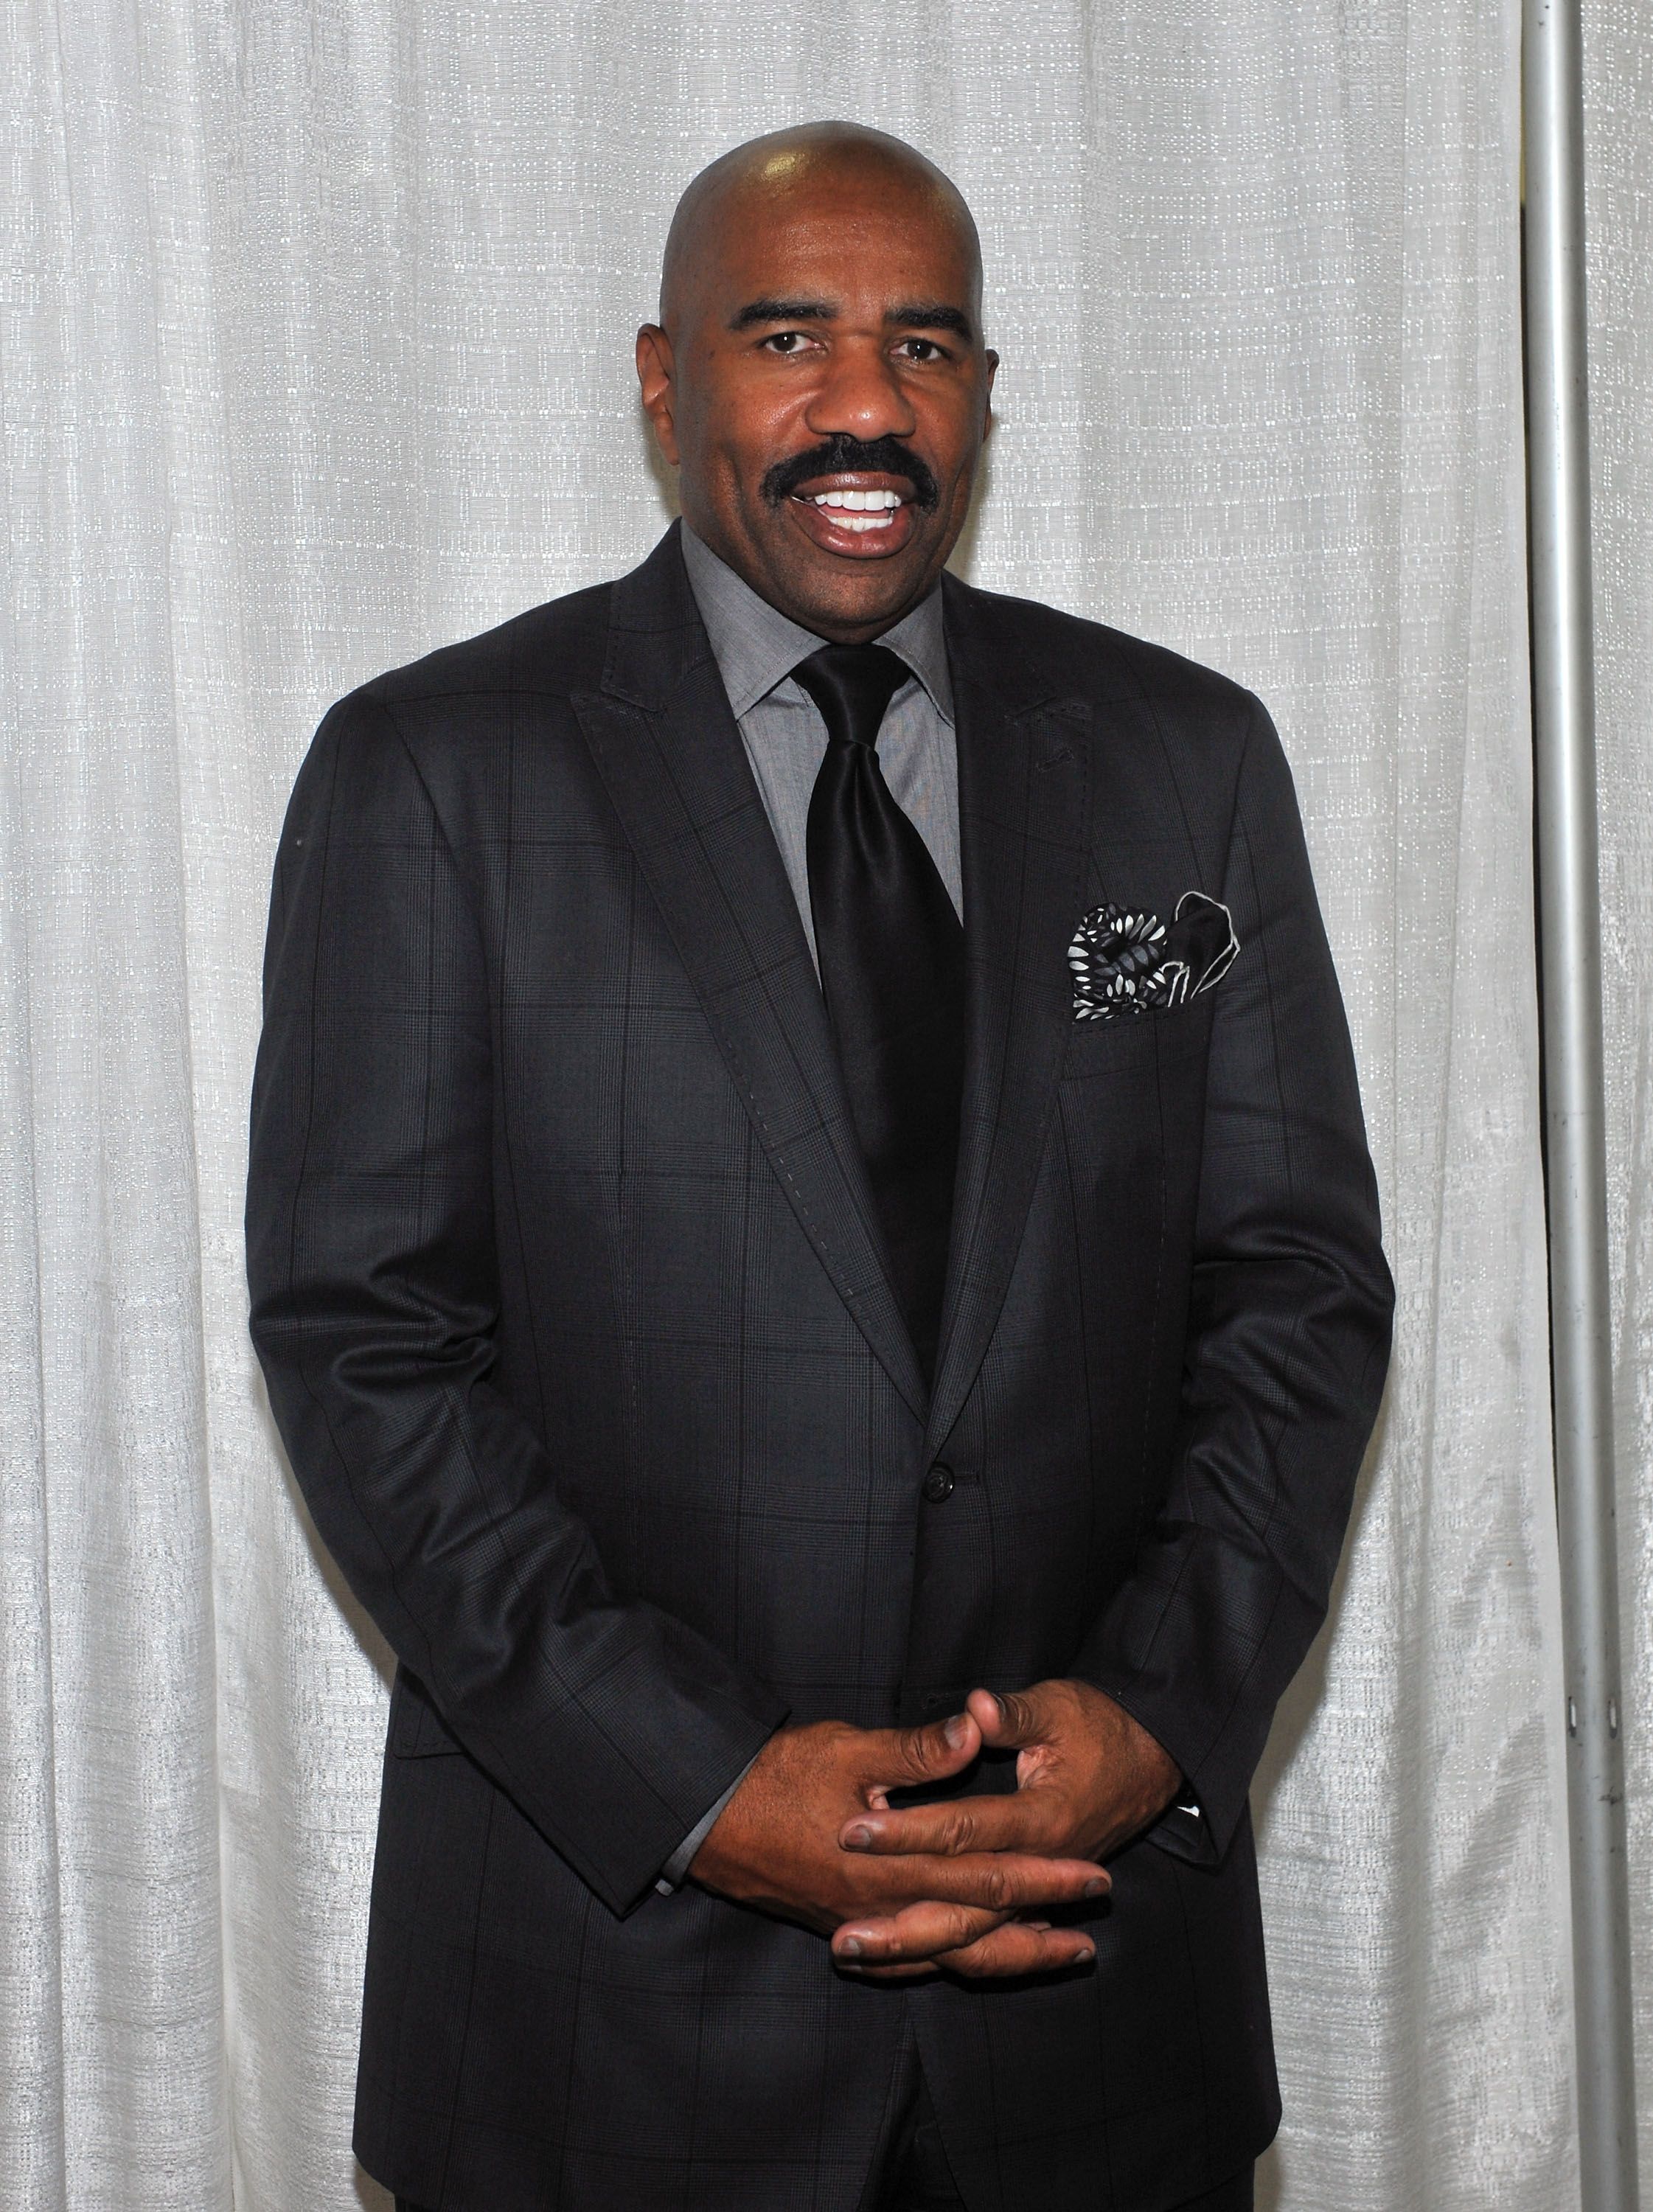 Steve Harvey at the Steve Harvey Mentoring Weekend on October 7, 2011 in New York. | Photo: Getty Images